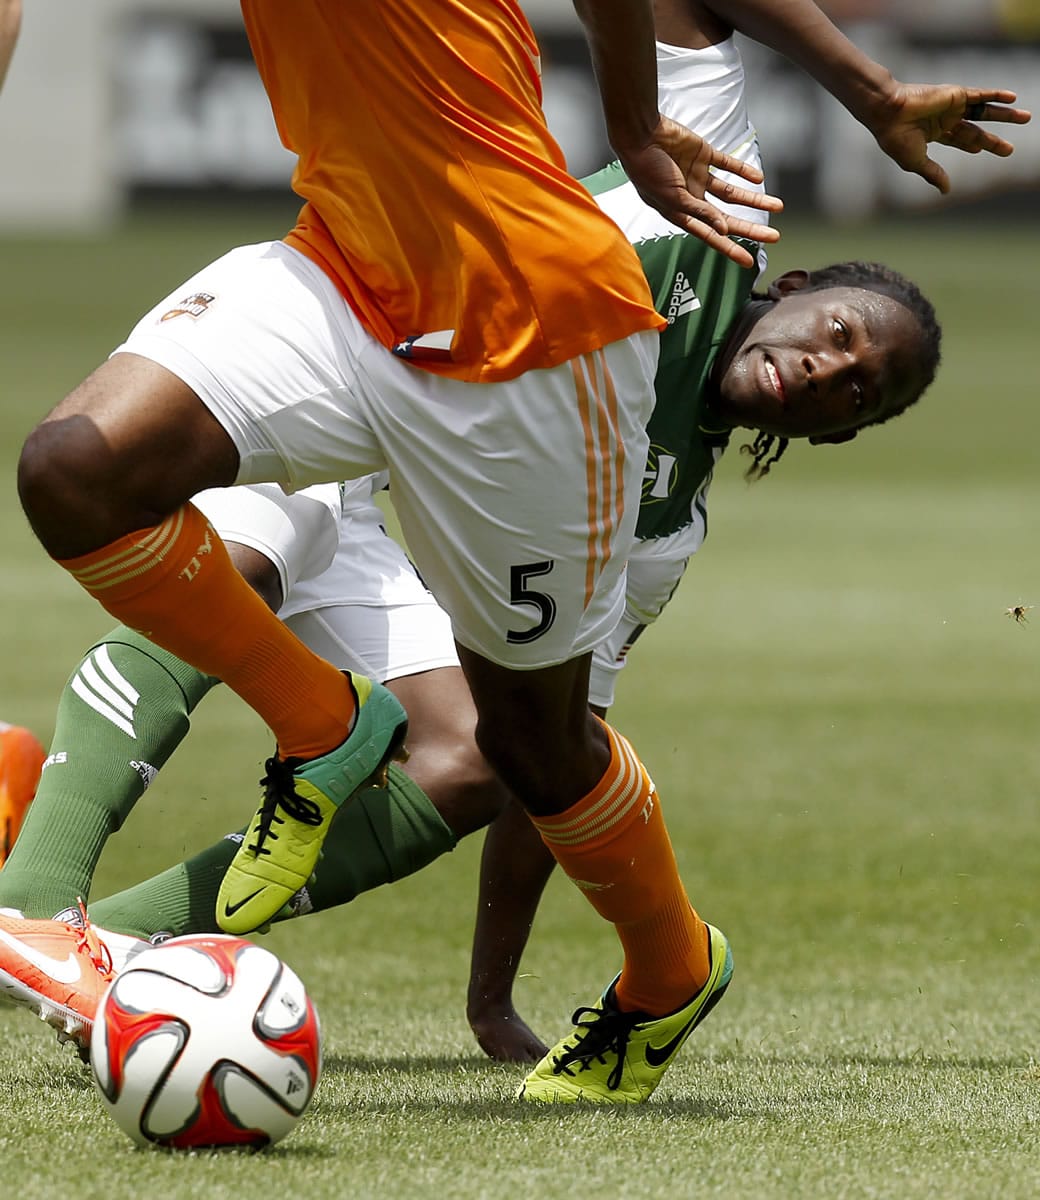 Portland Timbers midfielder Diego Chara tries to reach for the ball around Houston Dynamo defender Warren Creavalle (5) during an MLS soccer match, Sunday in Houston. Dynamo and Portland tied 1-1. (AP Photo/Houston Chronicle, Thomas B.